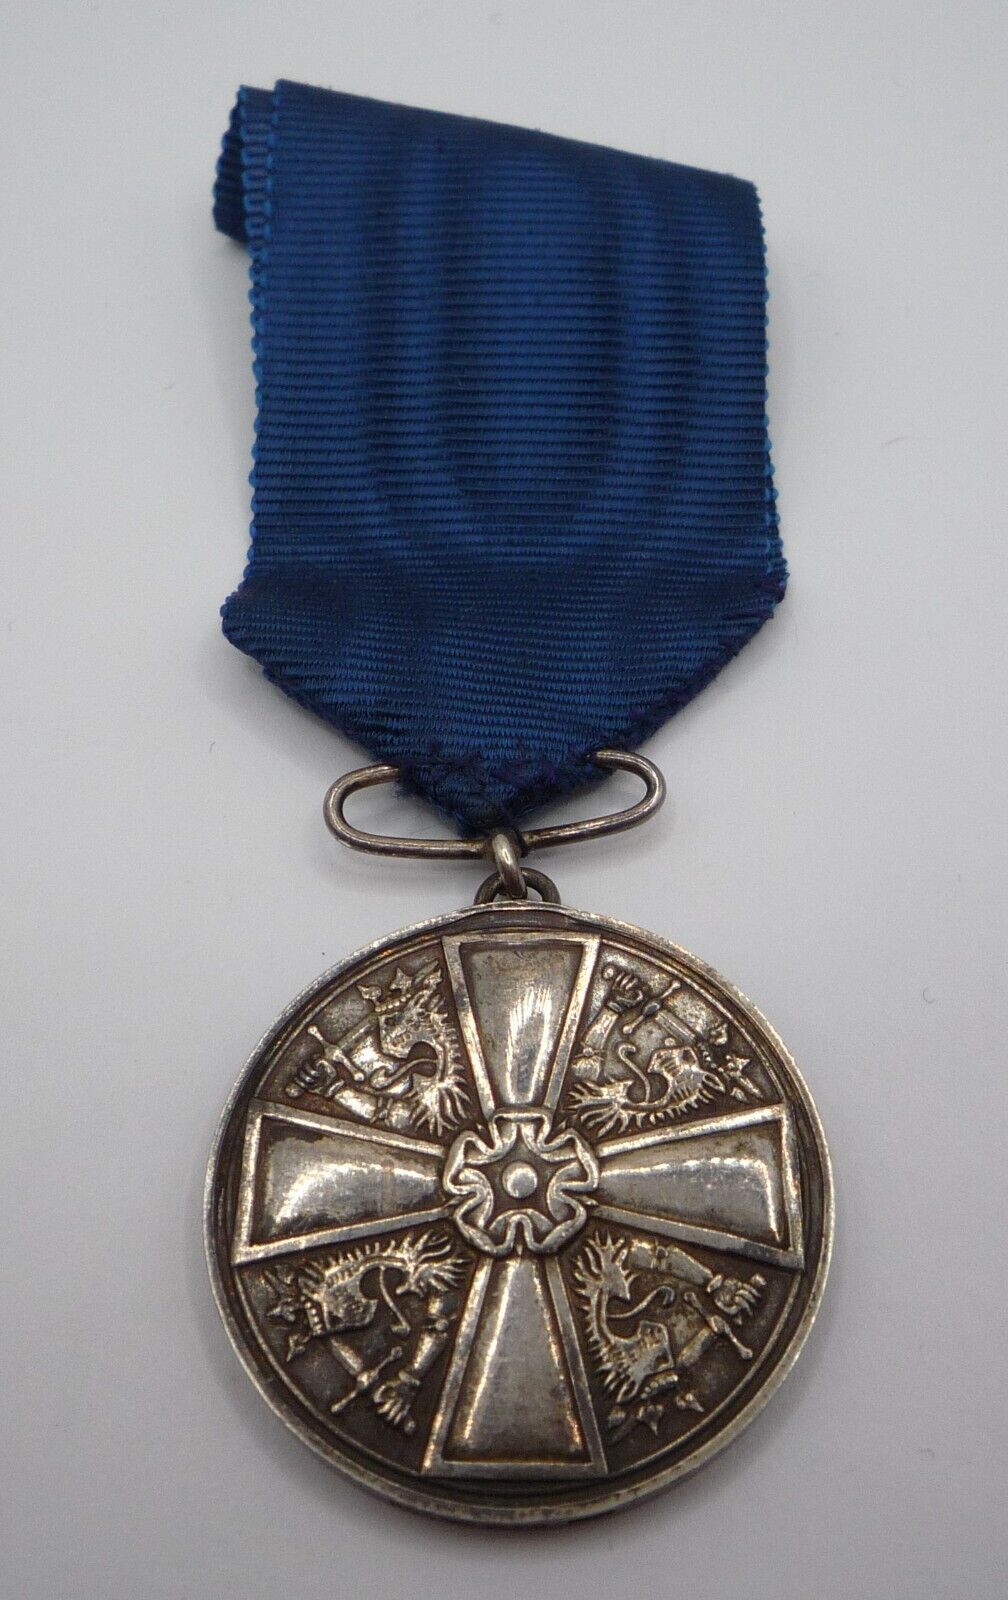 FINLAND / FINNISH ORDER OF THE WHITE ROSE MEDAL 2ND CLASS